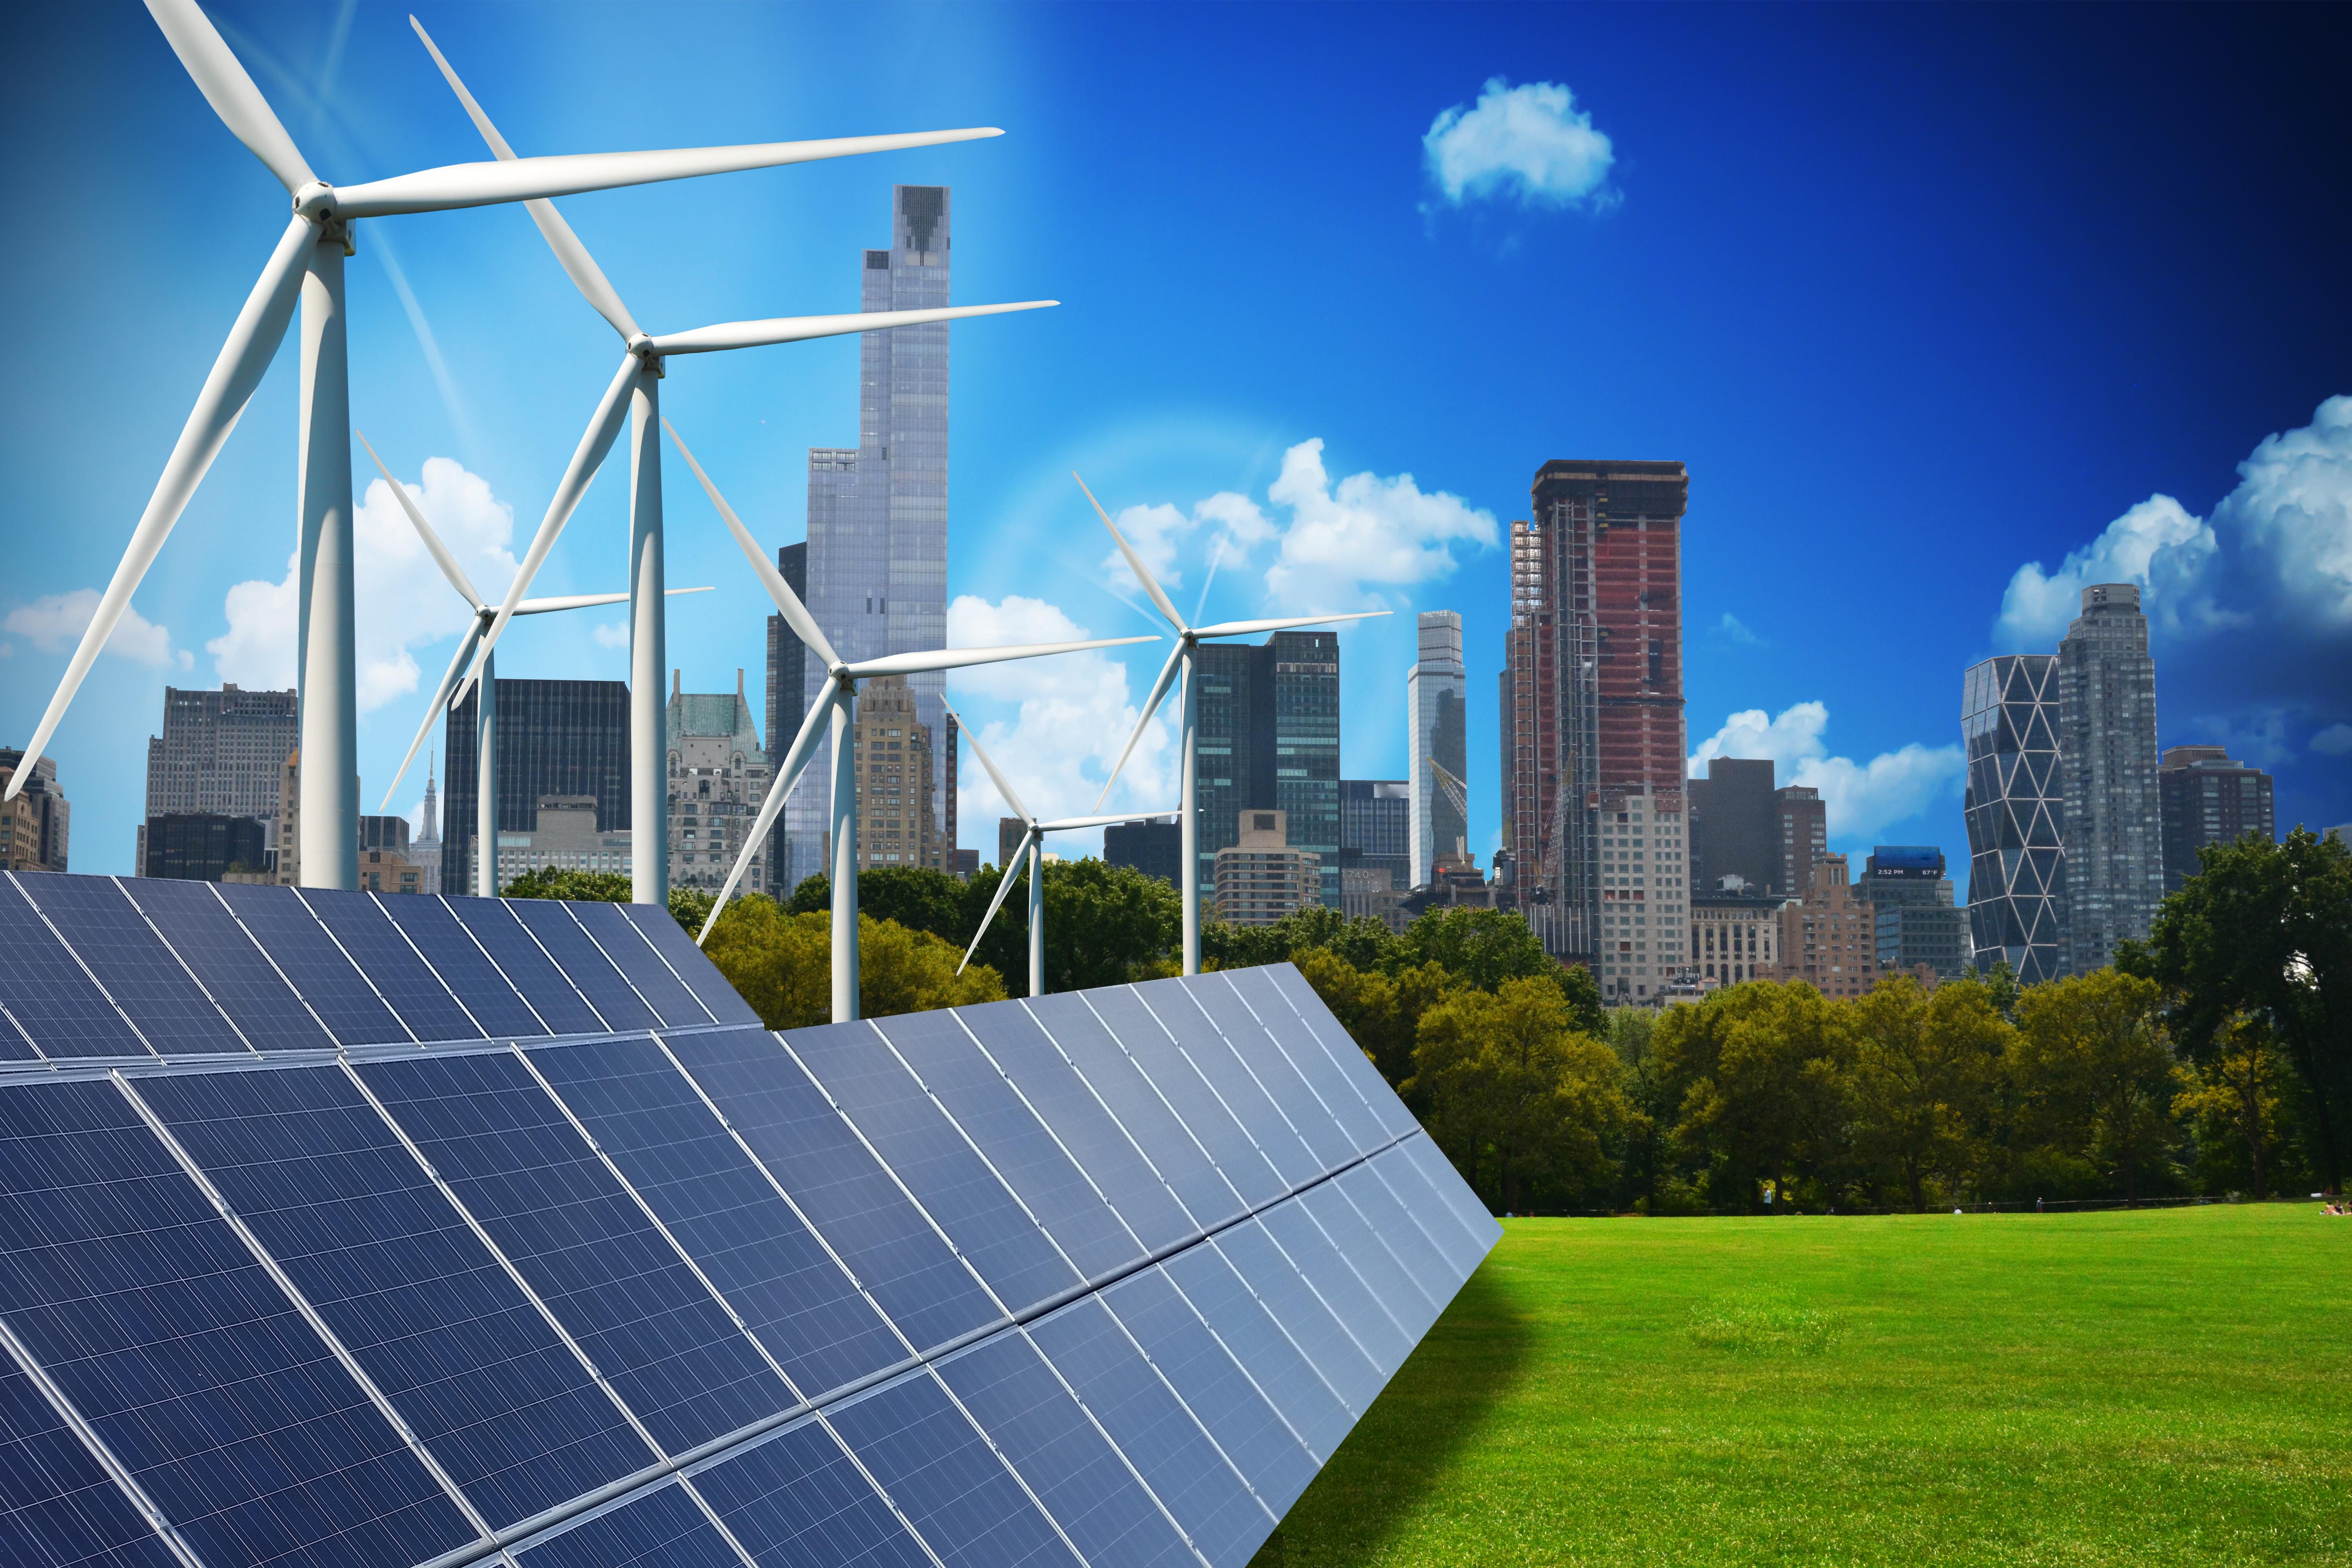 Green cities powered only by renewable energy sources—save money, their health, and our planet. (Photo: Eviart / Shutterstock.com) 